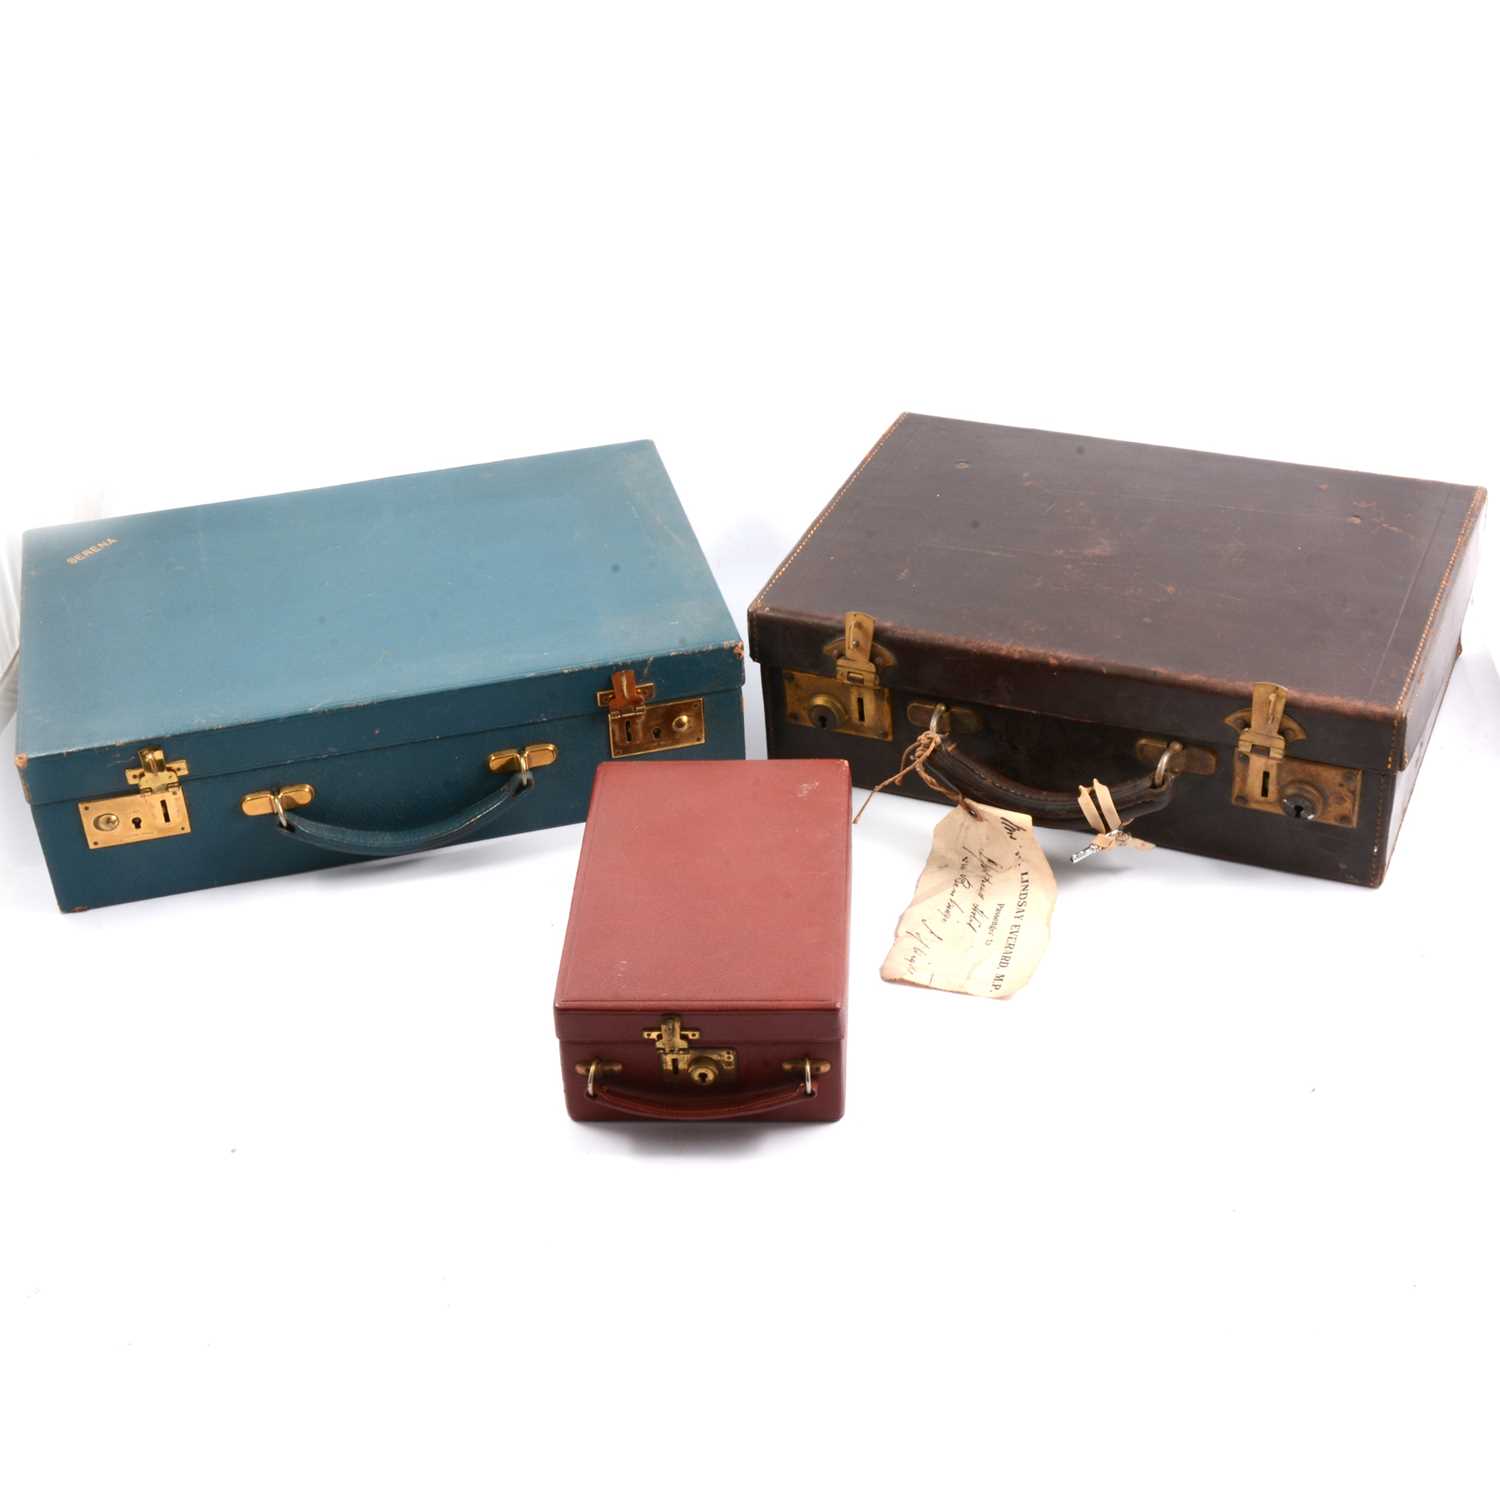 Lot 116 - Small leather case with key, blue stationery case, jewel box.